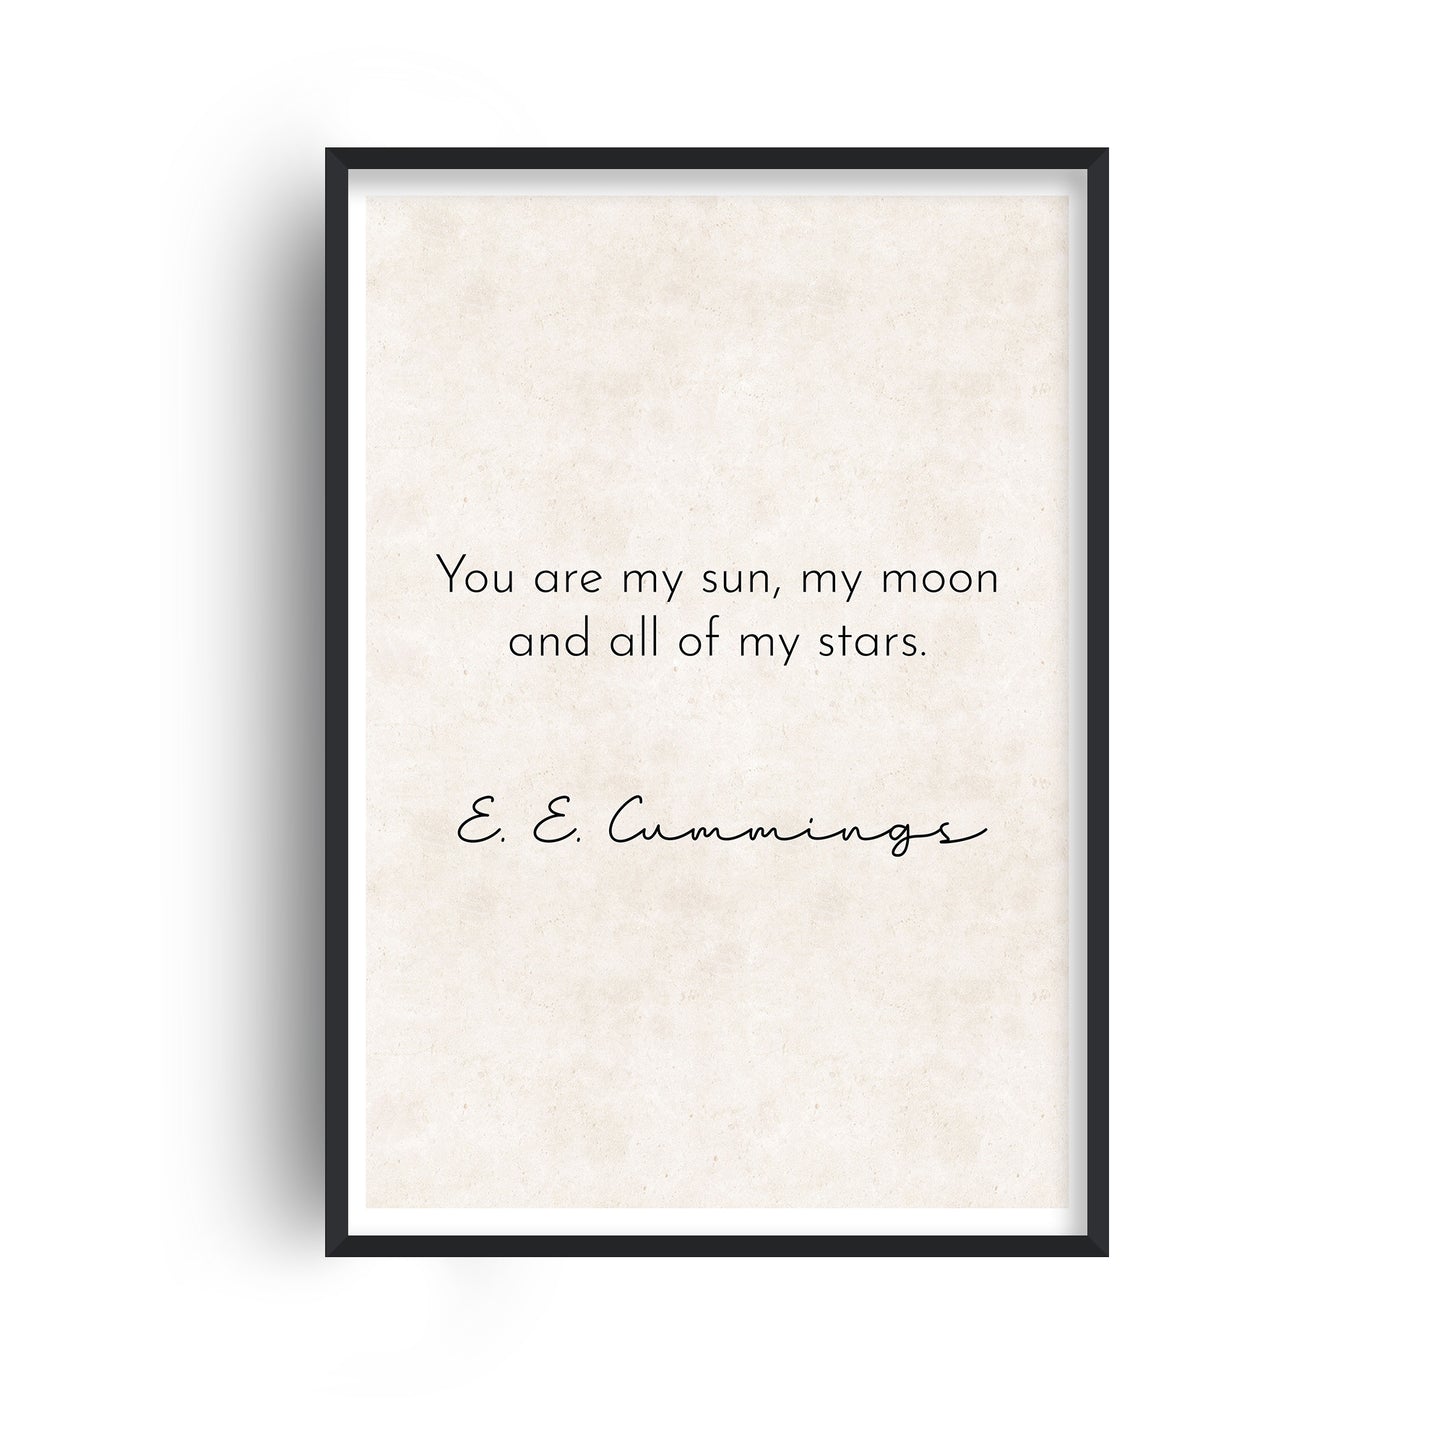 You Are My Sun - EE Cummings Quote Print